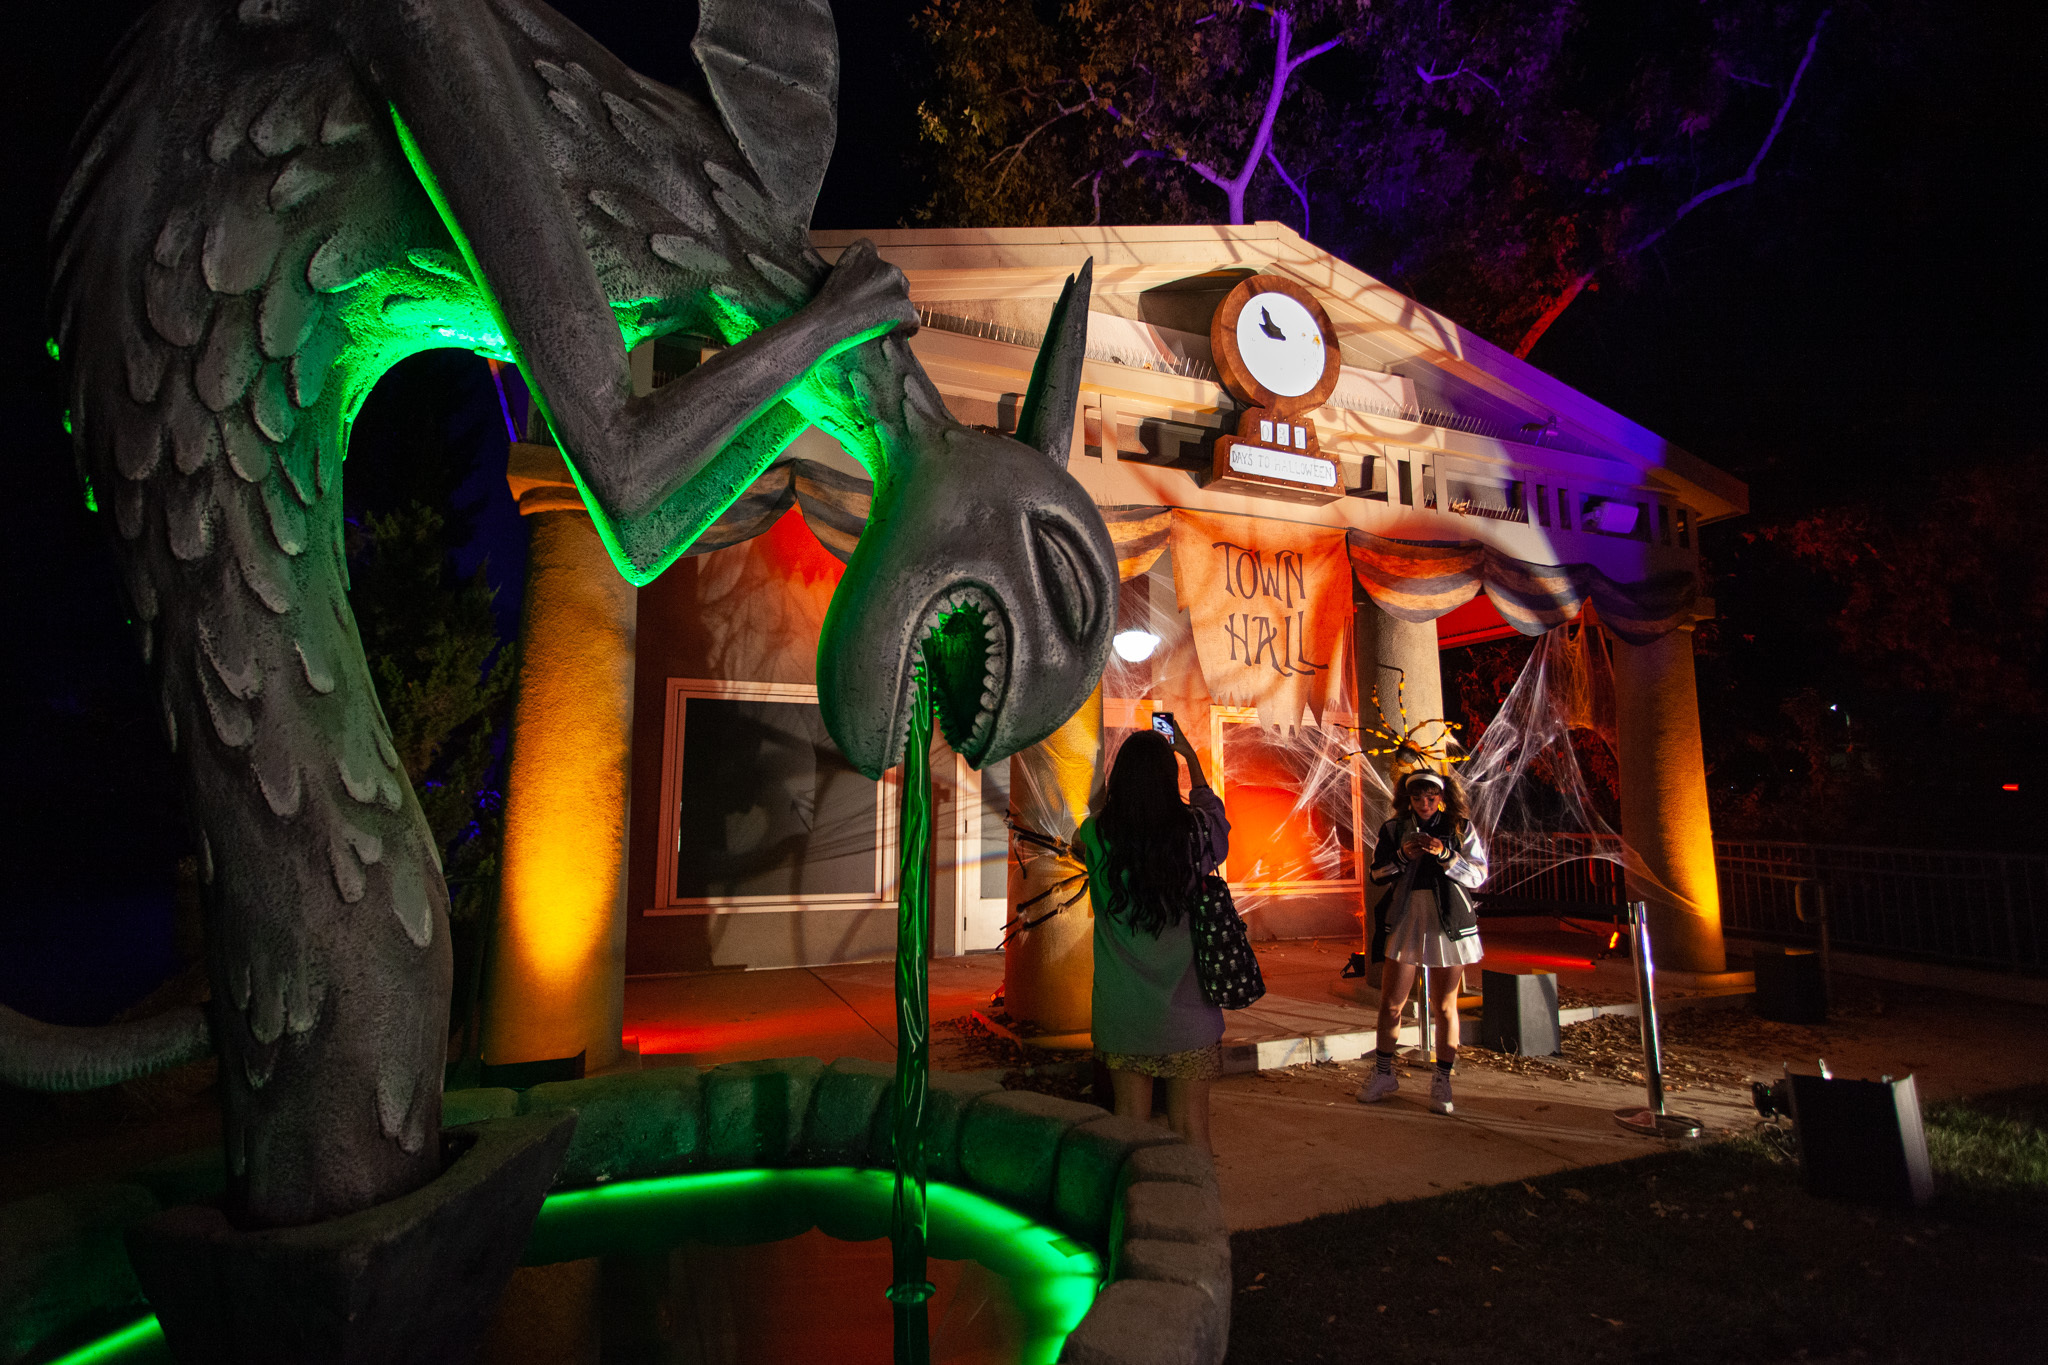 Freeform’s Halloween Road Things to do in Los Angeles